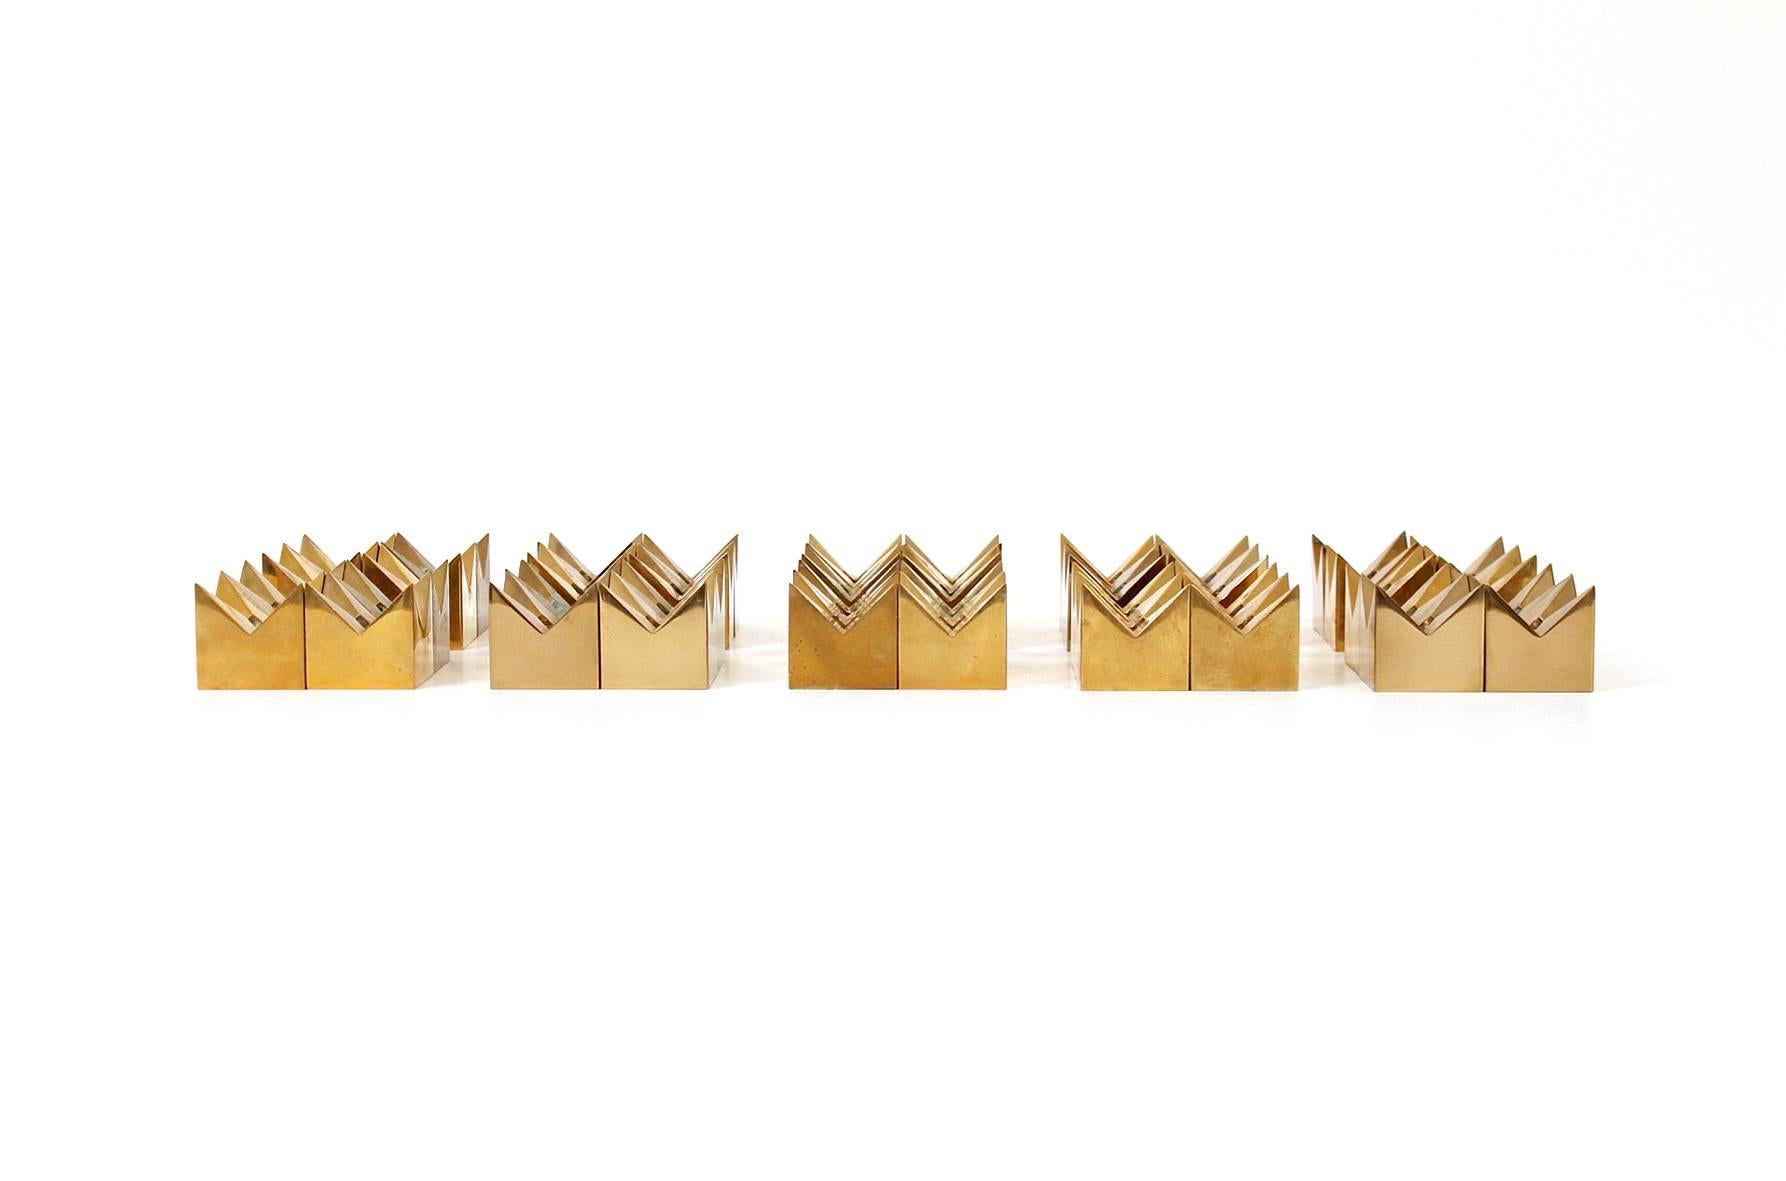 Collection of 40 brass candleholders by Pierre Forssell for the Swedish firm Skultuna. Graphic group of small functional sculptures. Impressed mark to underside of each example. Dimensions below for each candleholder.